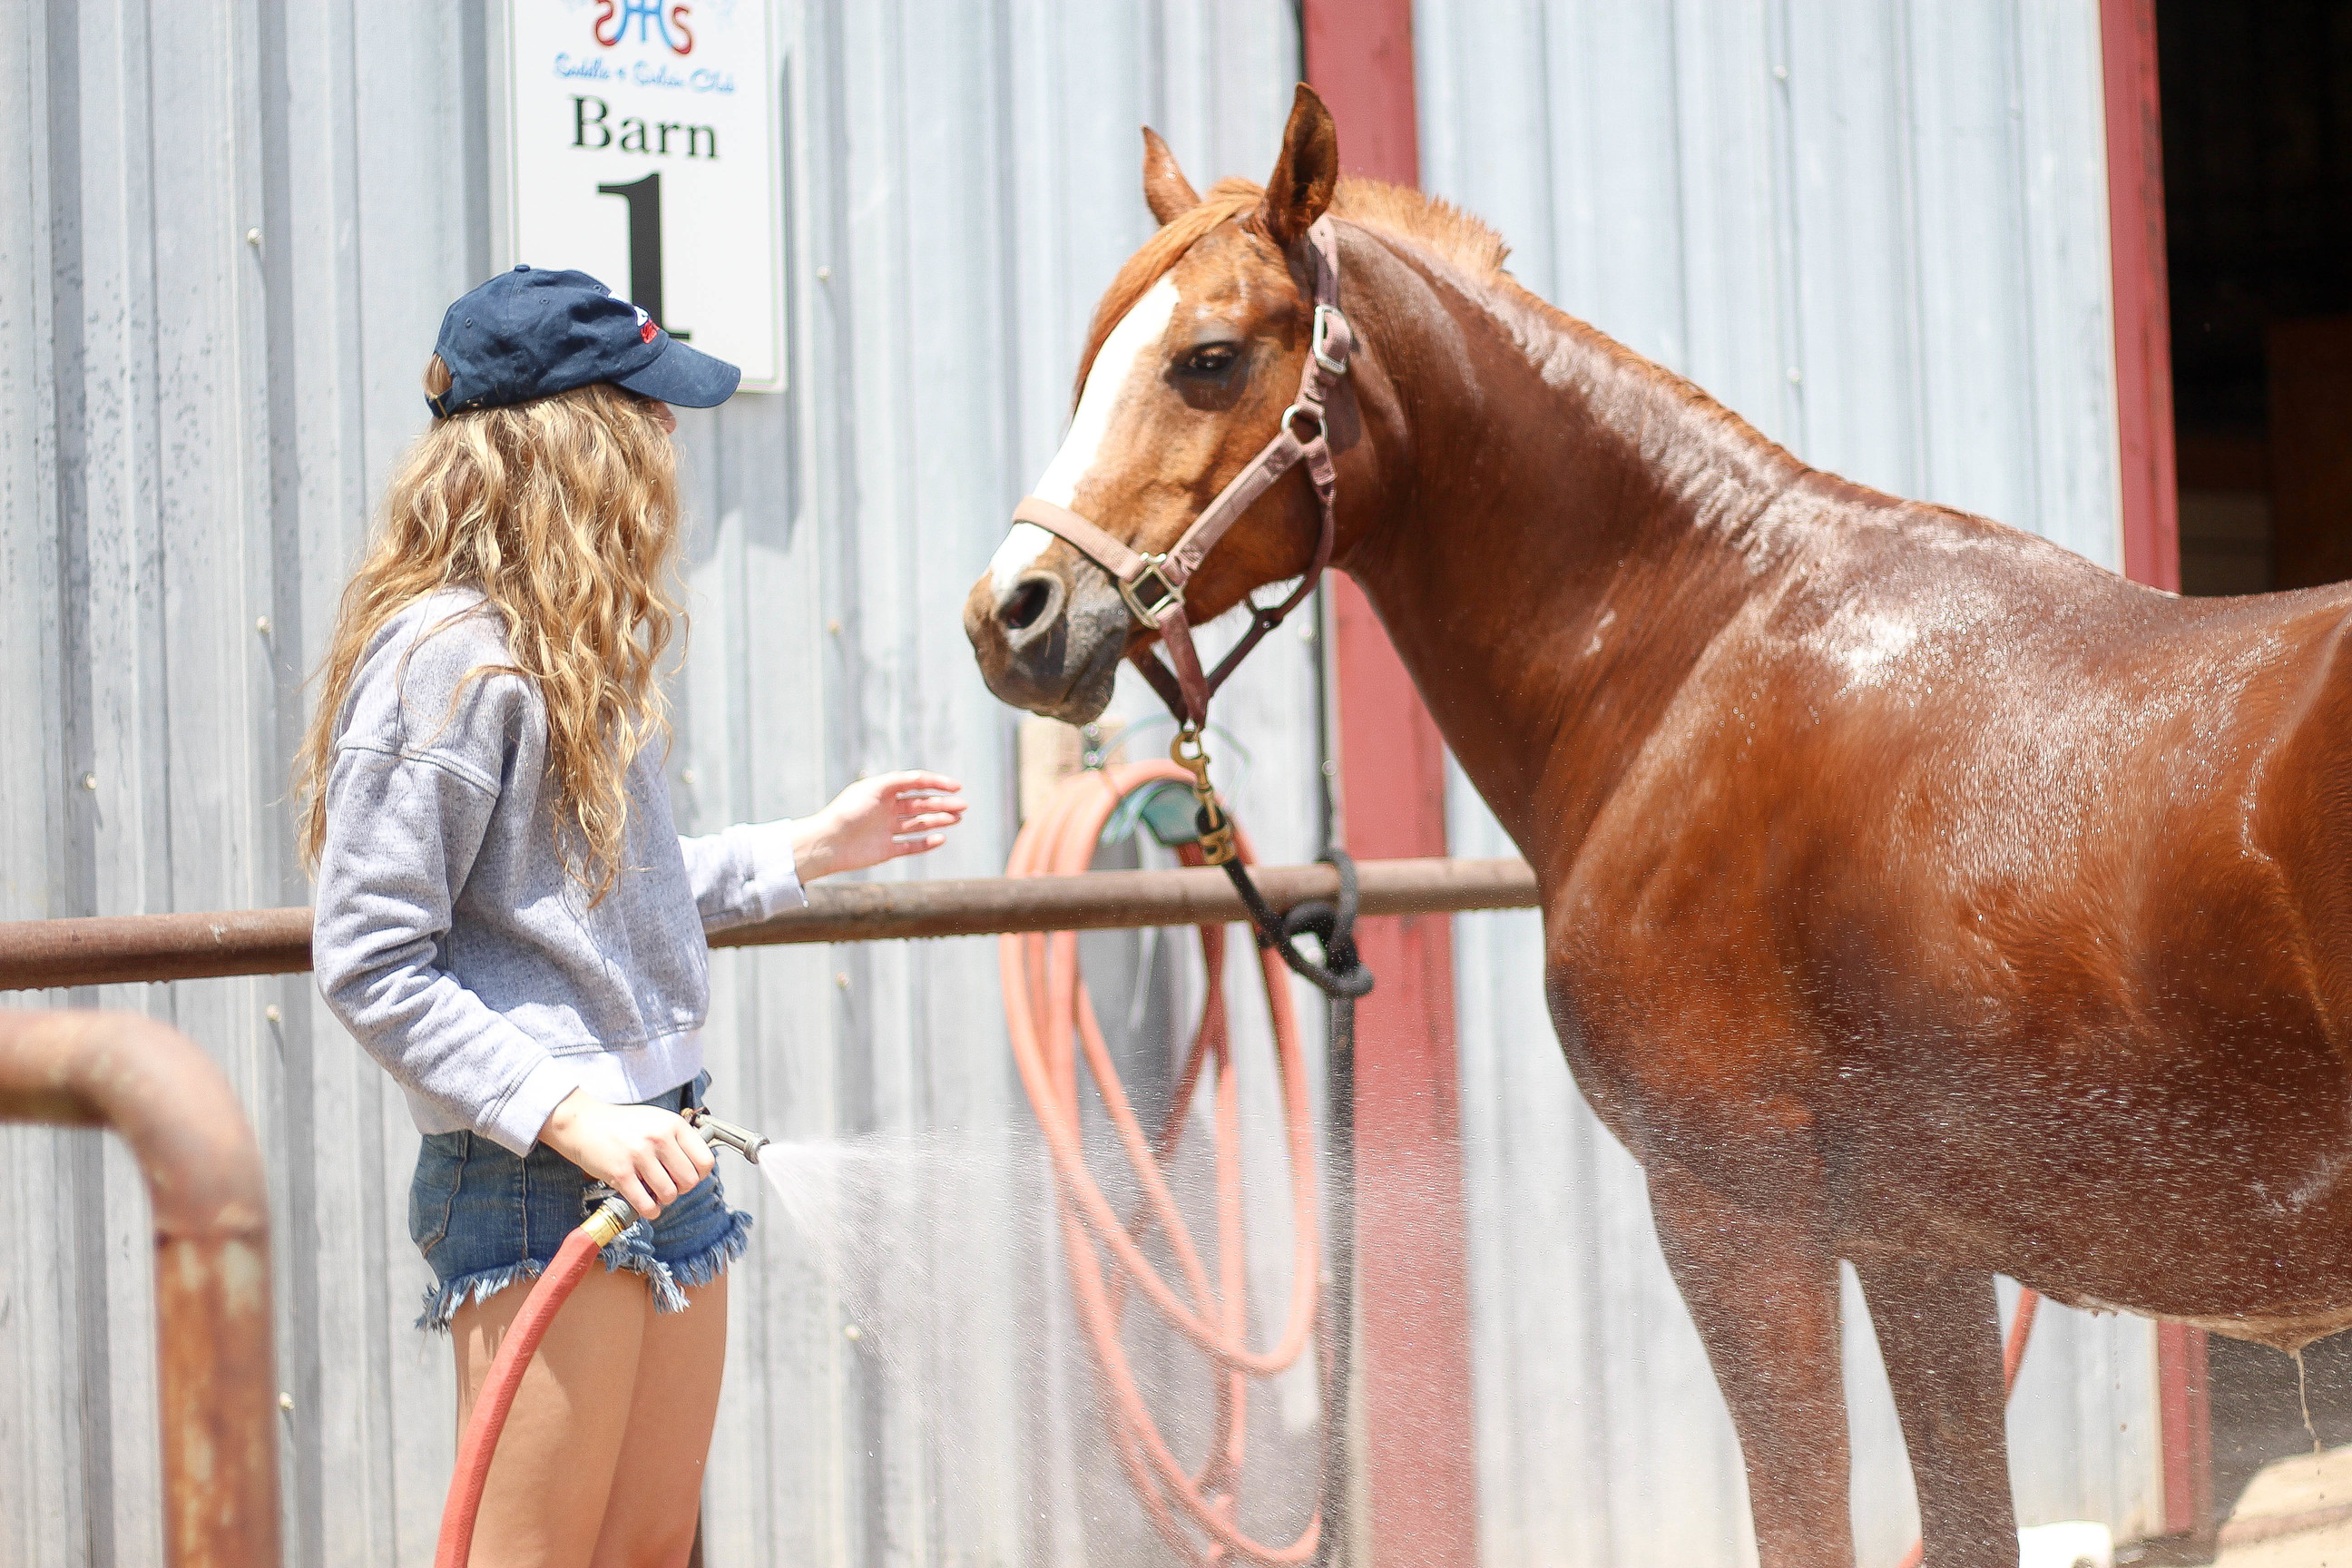 Horse back riding, horse and girl, horses, sorority hat, barn outfit, by lauren lindmark on daily dose of charm